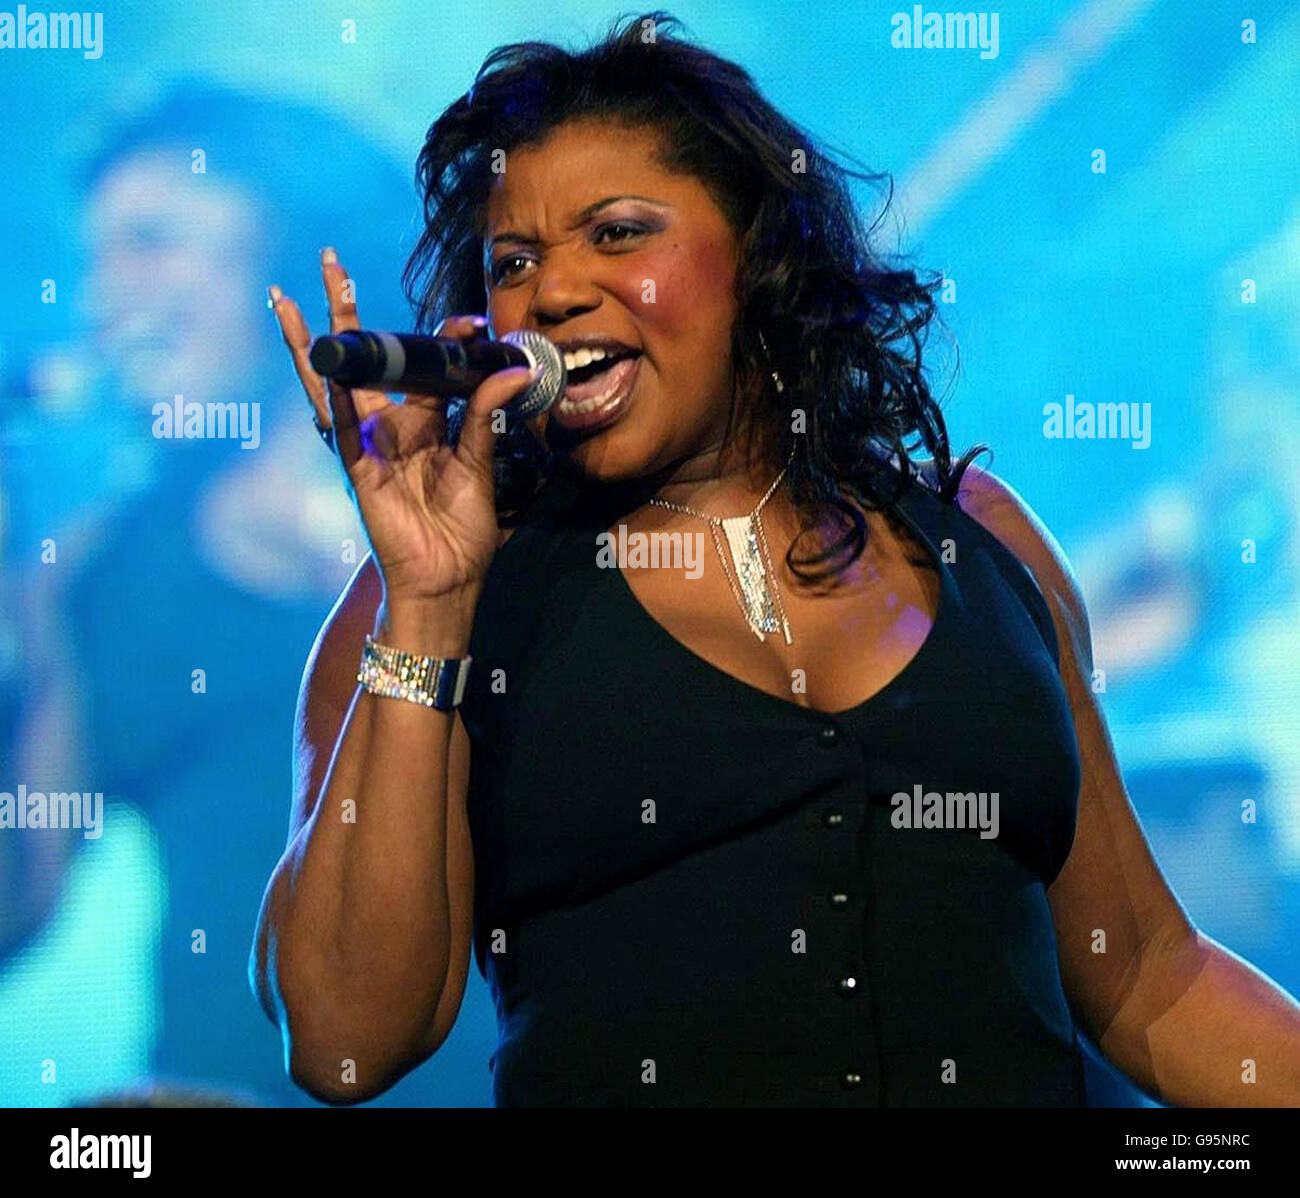 Brenda performs on stage during X Factor 2 Live, at the MEN Arena, Manchester, Saturday 25 February 2006. PRESS ASSOCIATION Photo. Photo credit should read: Dave Kendall/PA Stock Photo